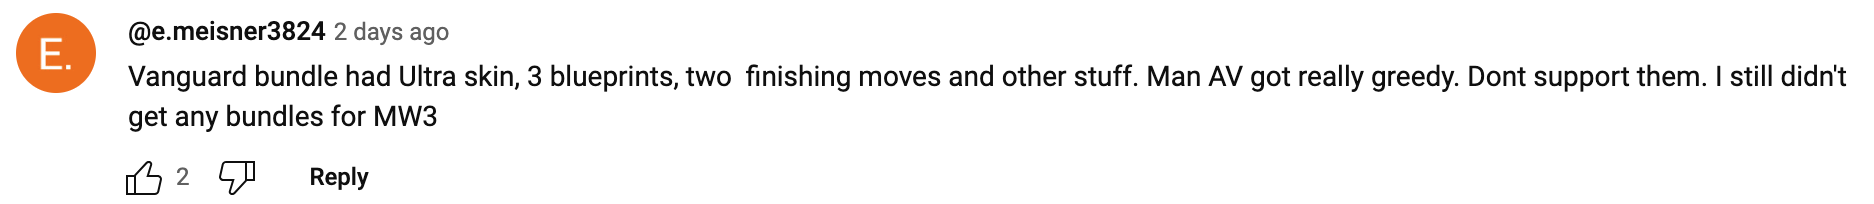 YouTube comment about Vanguard Horsemen bundle being better than MW3 1